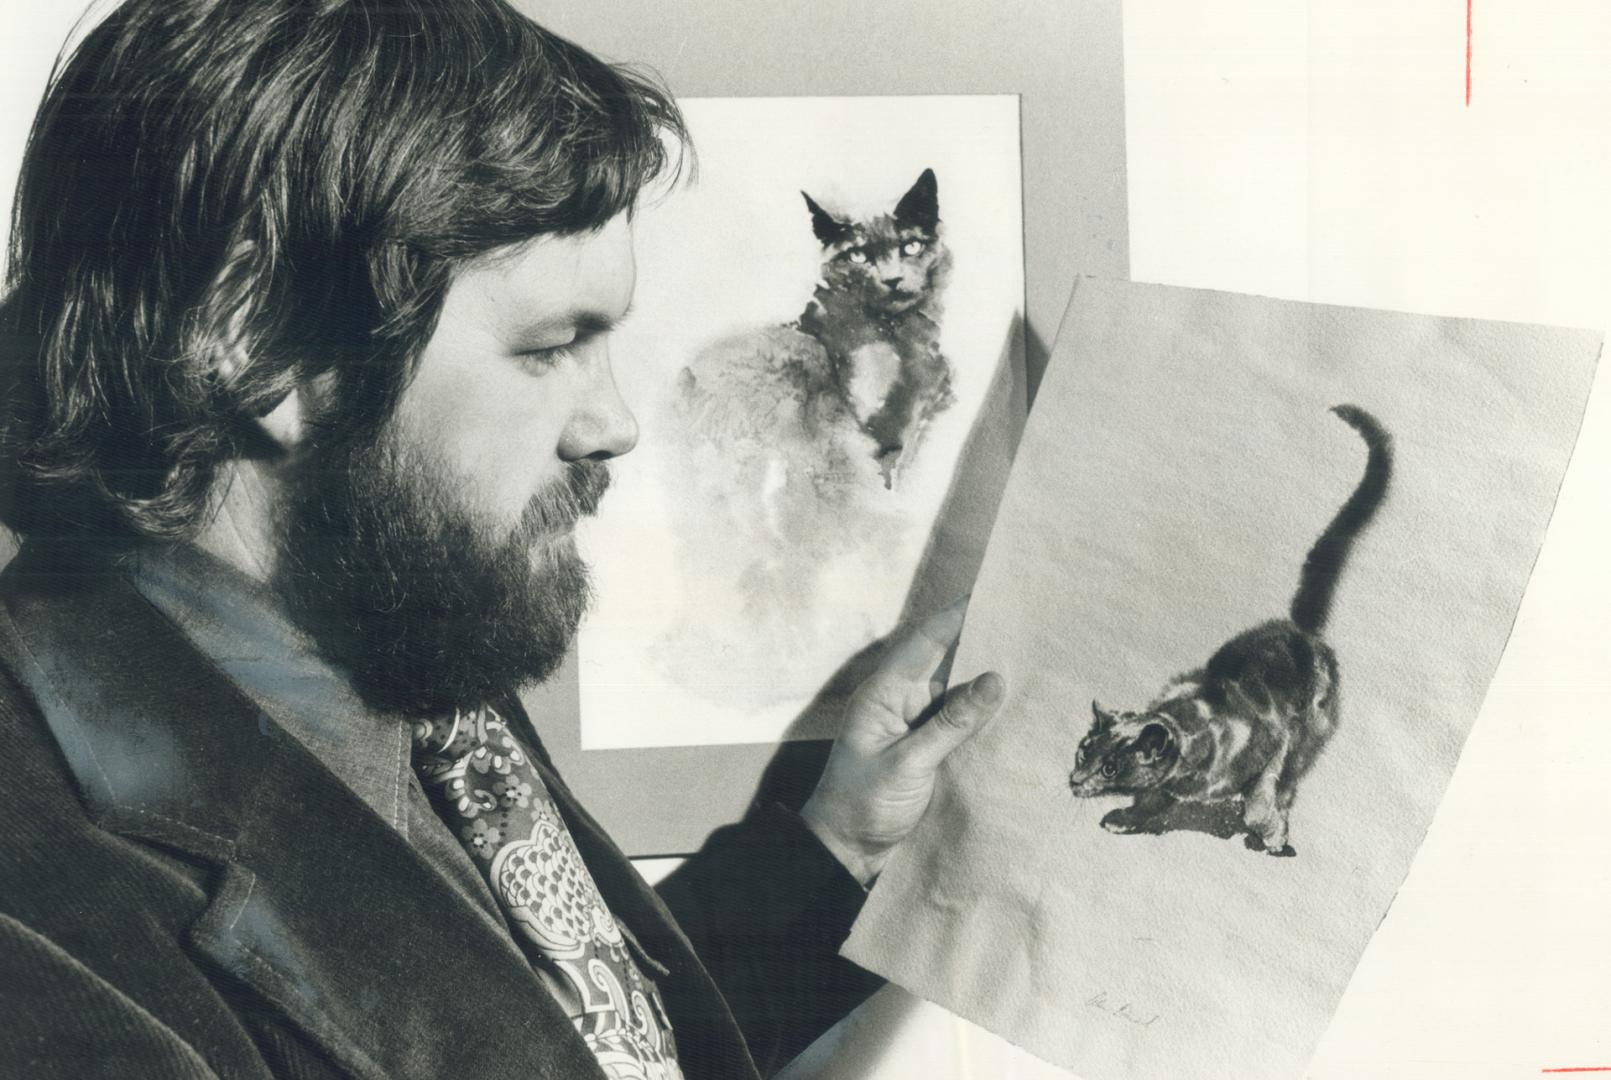 Artist Alan Daniel with two of the delighful cats he created in water colors for the new anthology of poetry In Praise Of Cats. The poems about cats i(...)